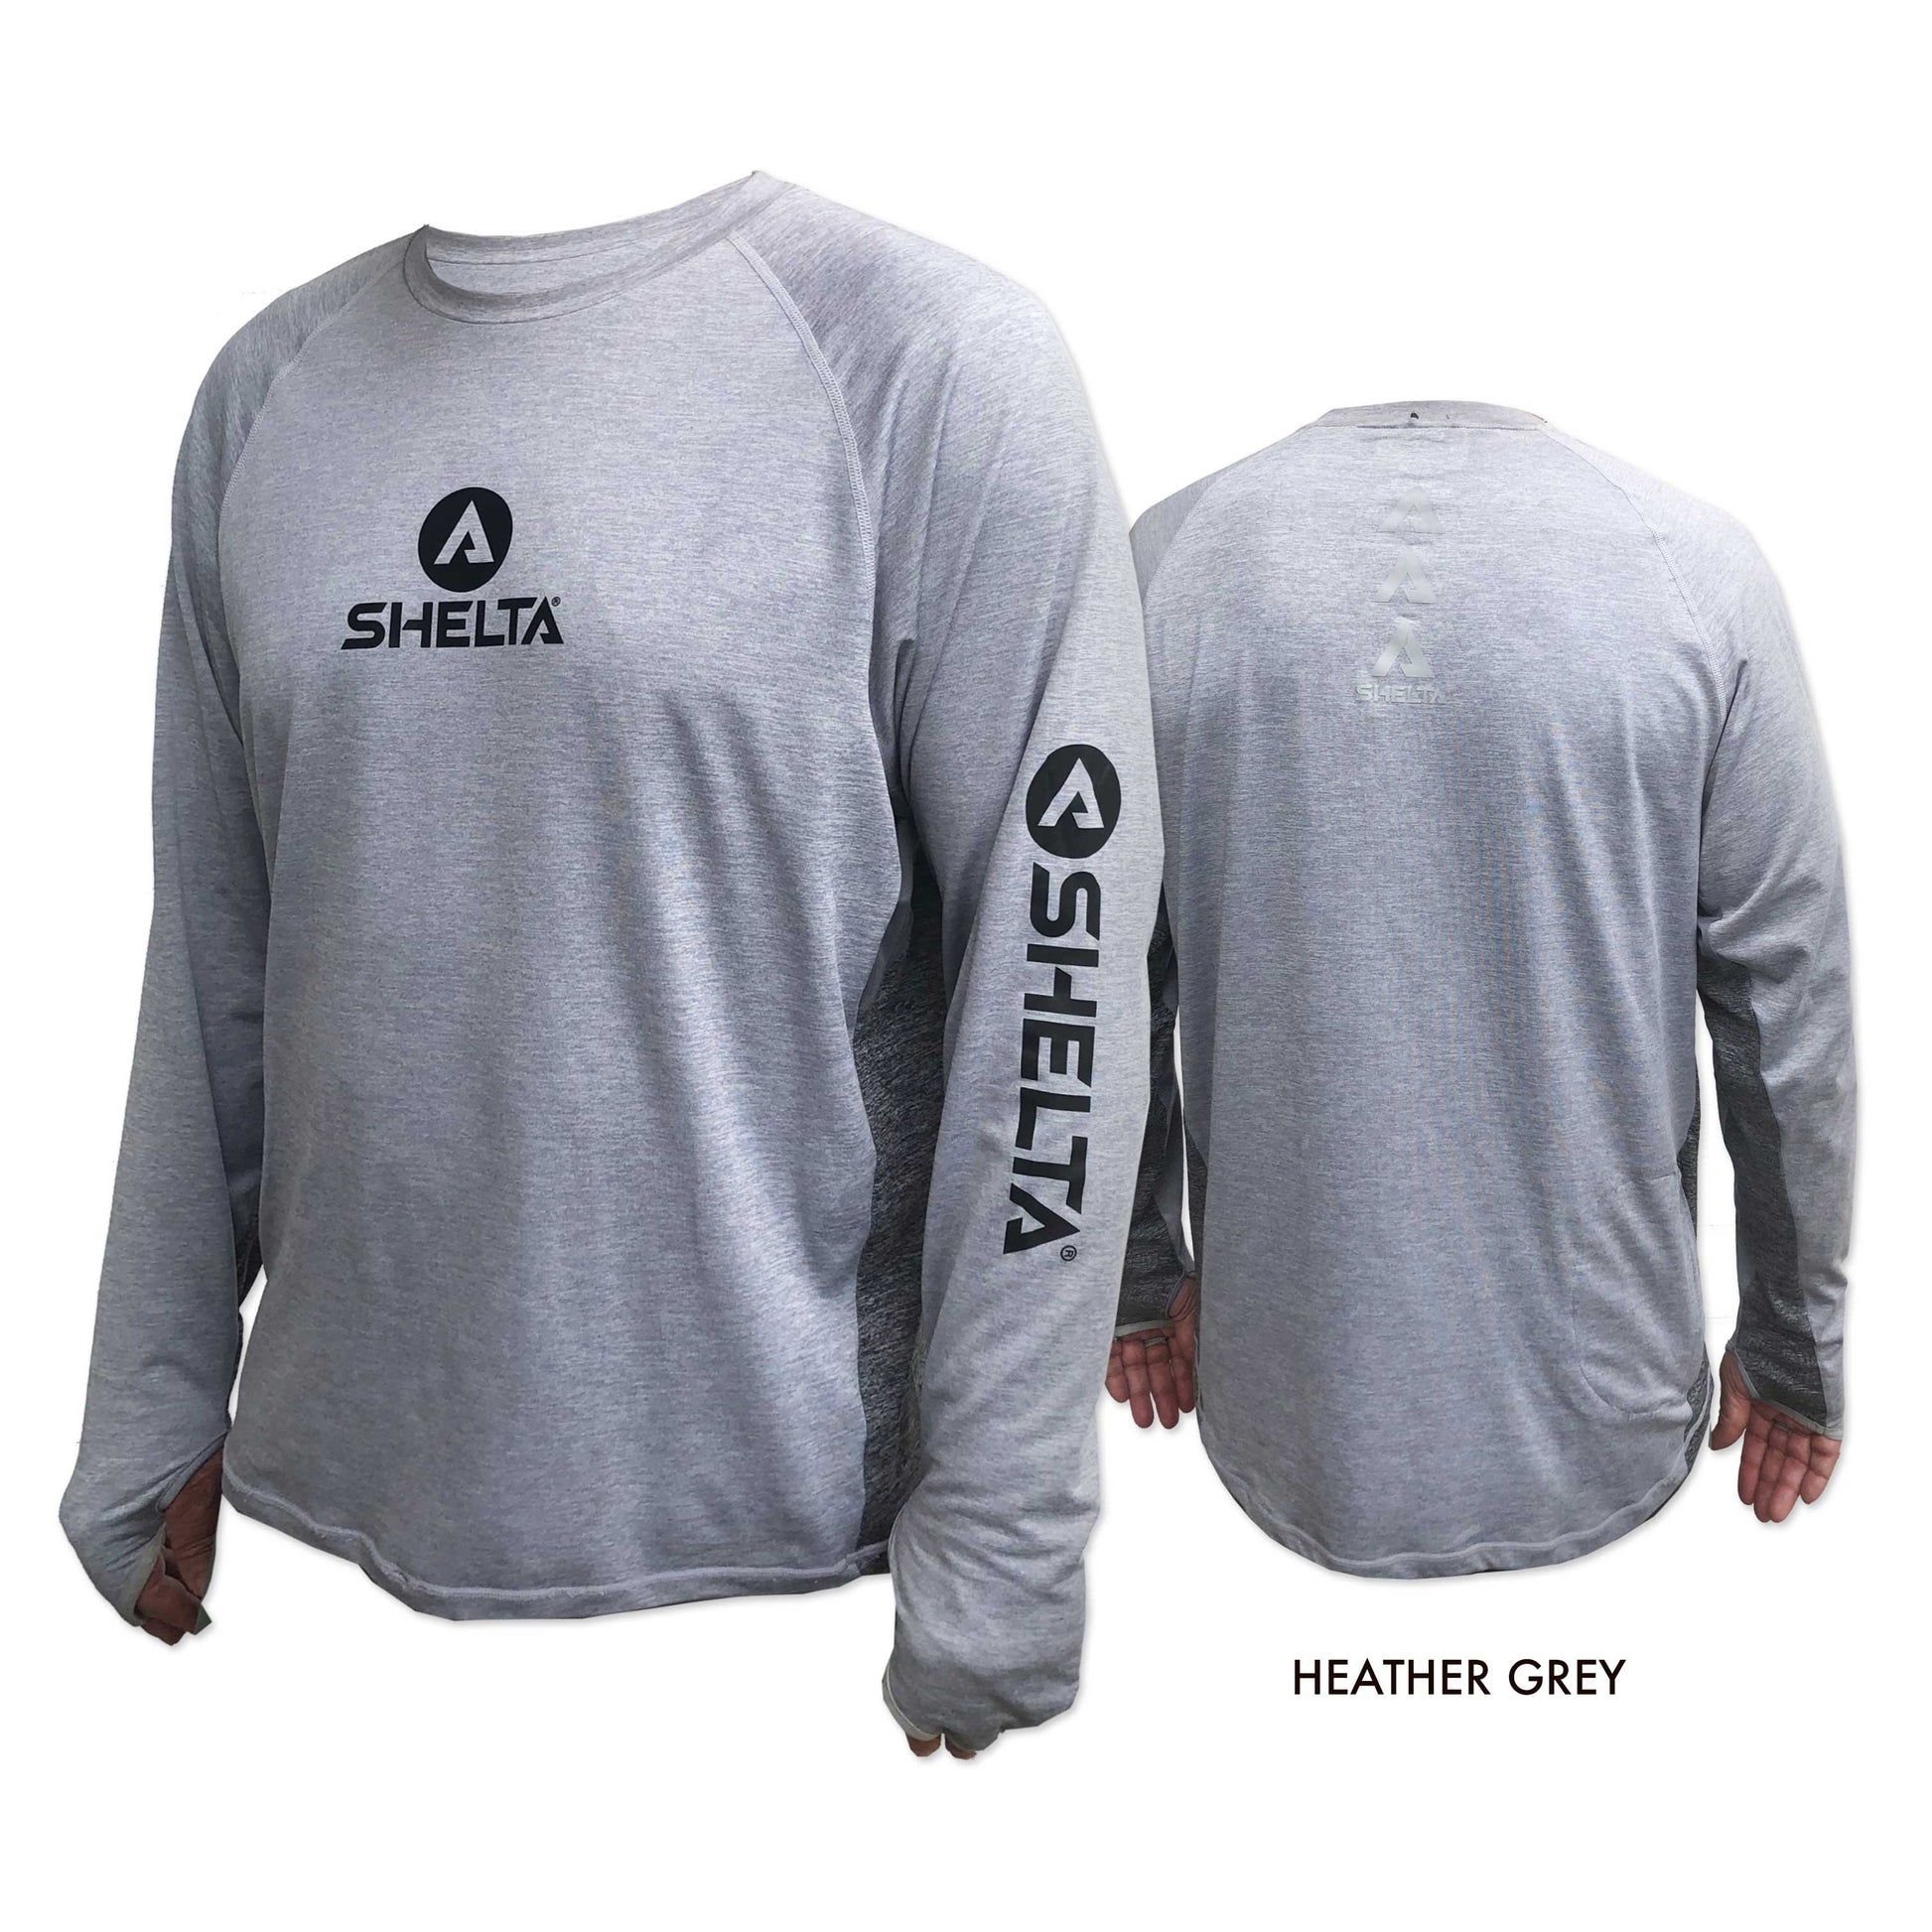 The Aquaterra Crew neck in Heather Grey is engineered & built with sun protection, function, and durability in mind.  Truly amphibious these technical tops work as well in the water as on land.  Offering features consistent with Shelta core values and innovation goals.   UPF 50+ UV protection, the highest rating given.  Blocks 98% of UVA/UVB radiation.